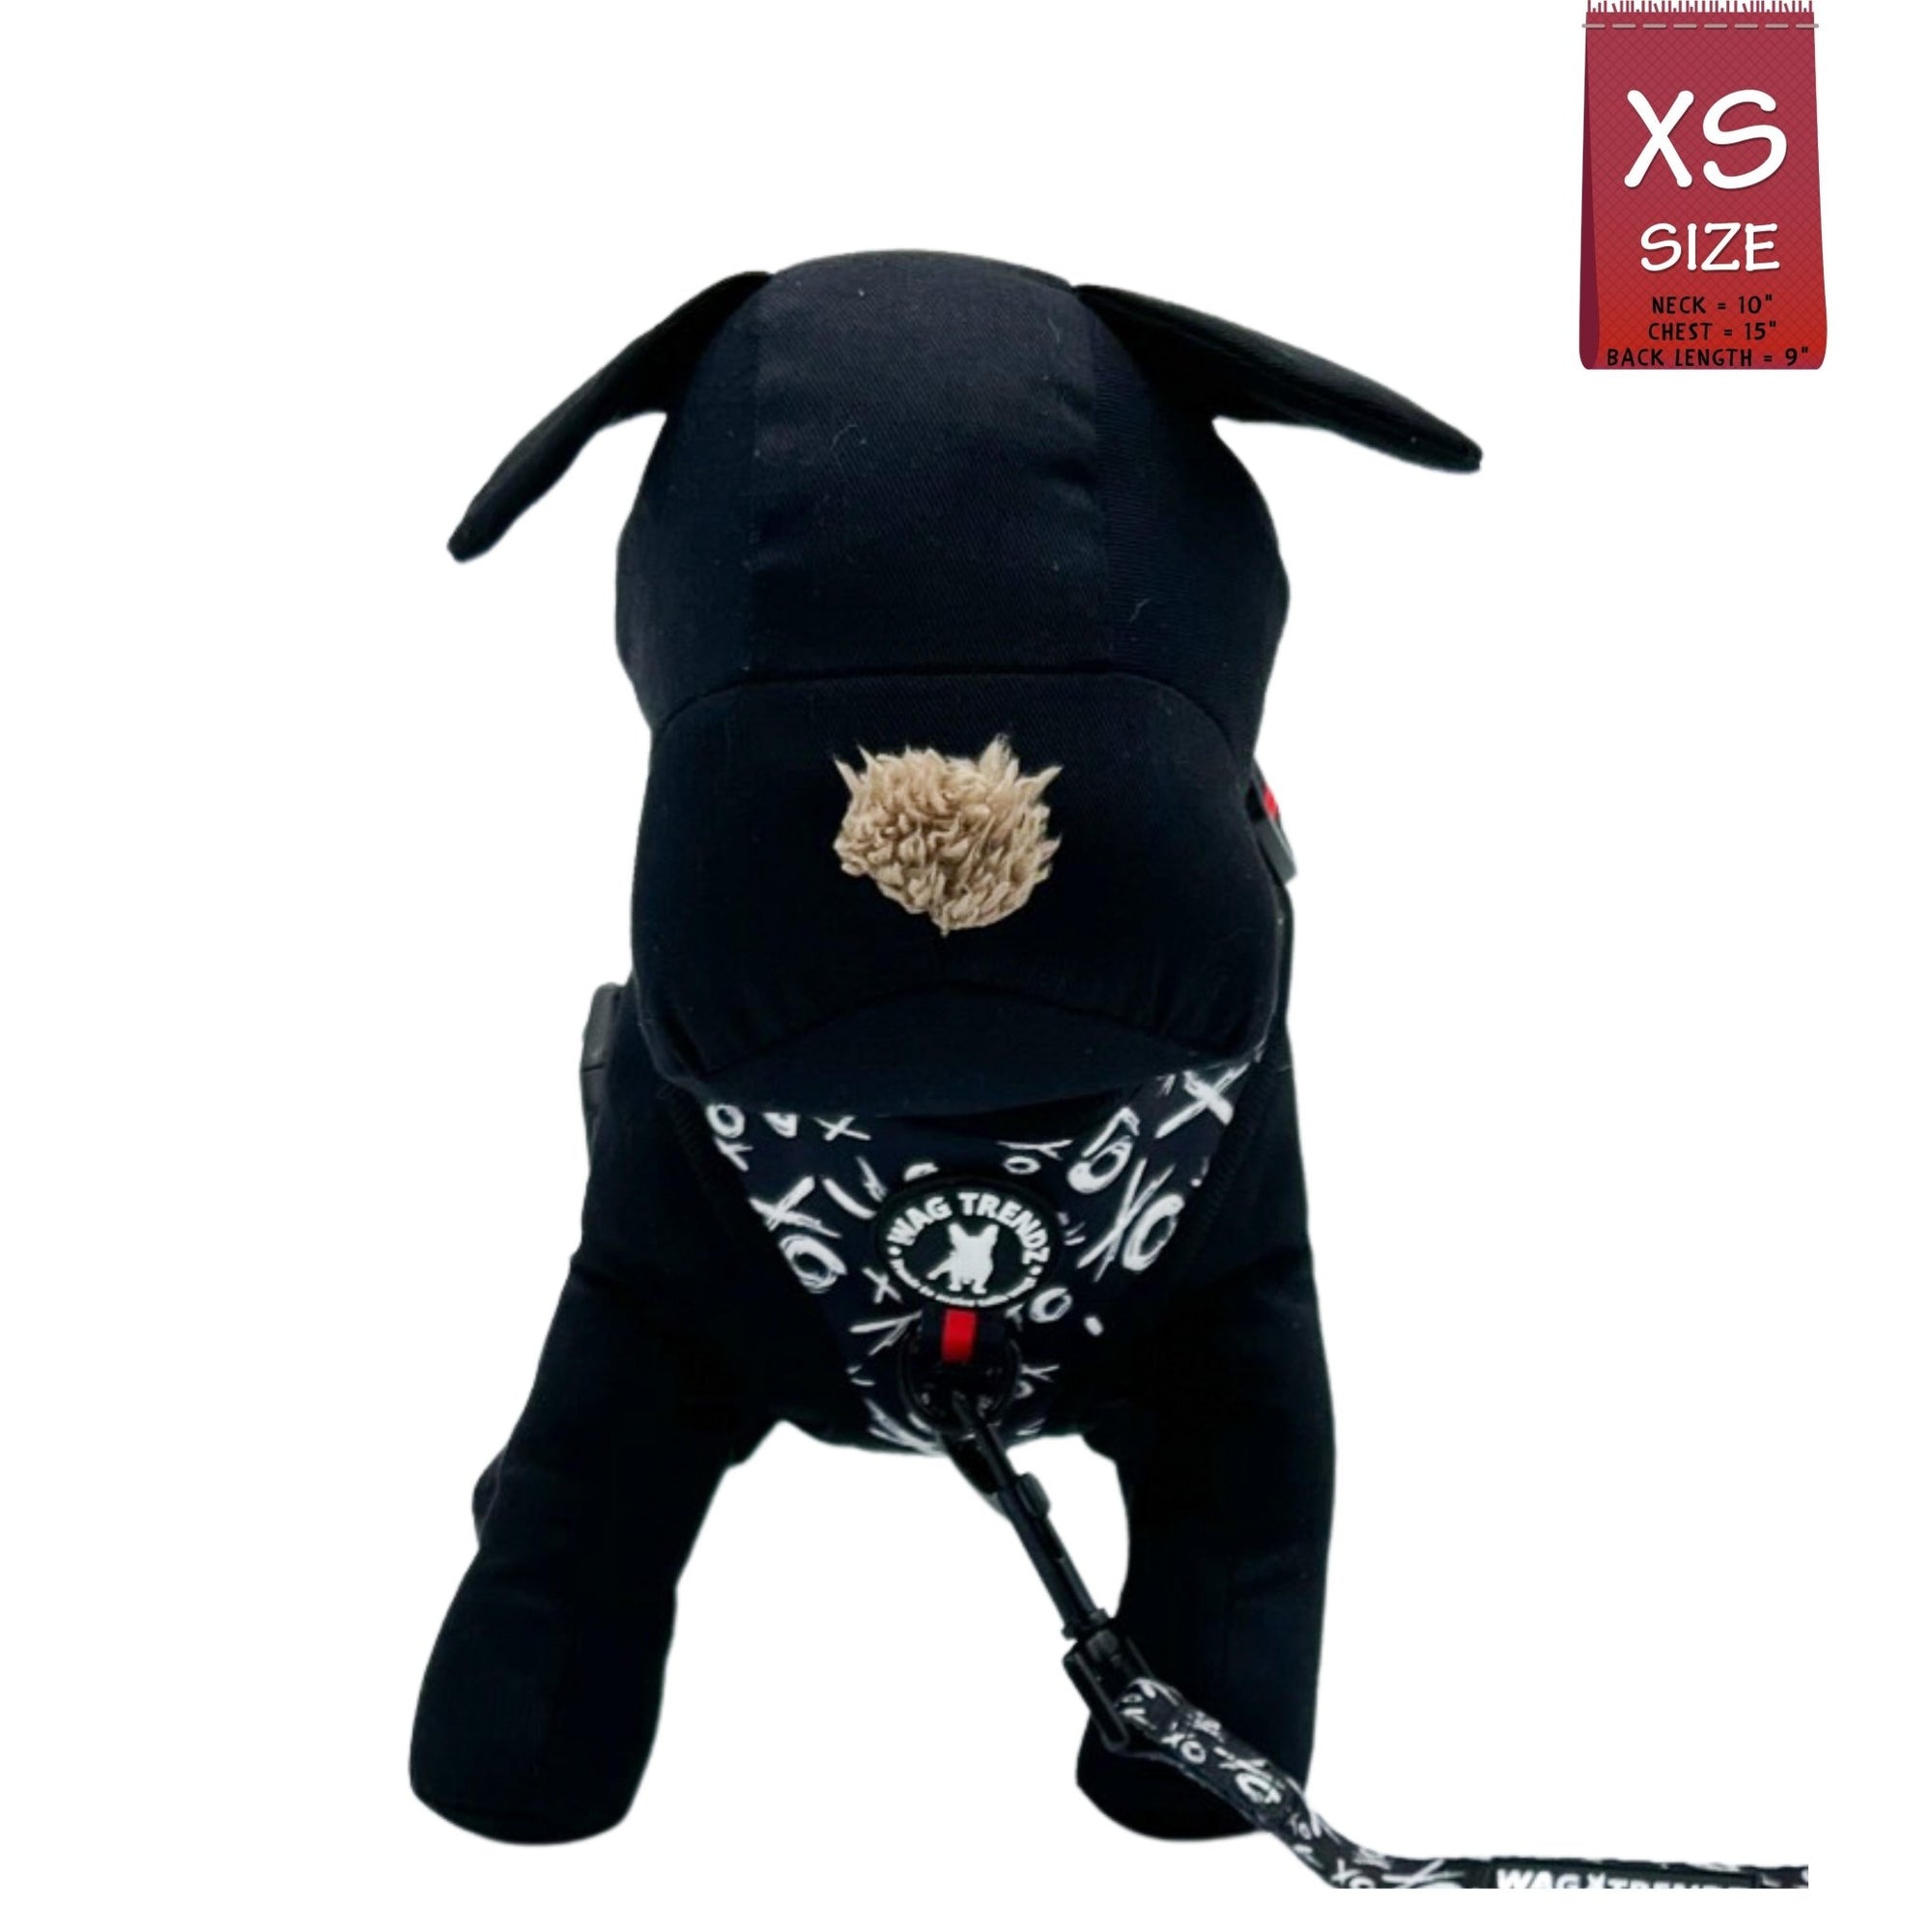 Dog Leash and Harness Set - Stuffed black dog wearing XS Dog Harness Vest with black and white XO&#39;s with bold red accents - matching leash attached - against solid white background - Wag Trendz